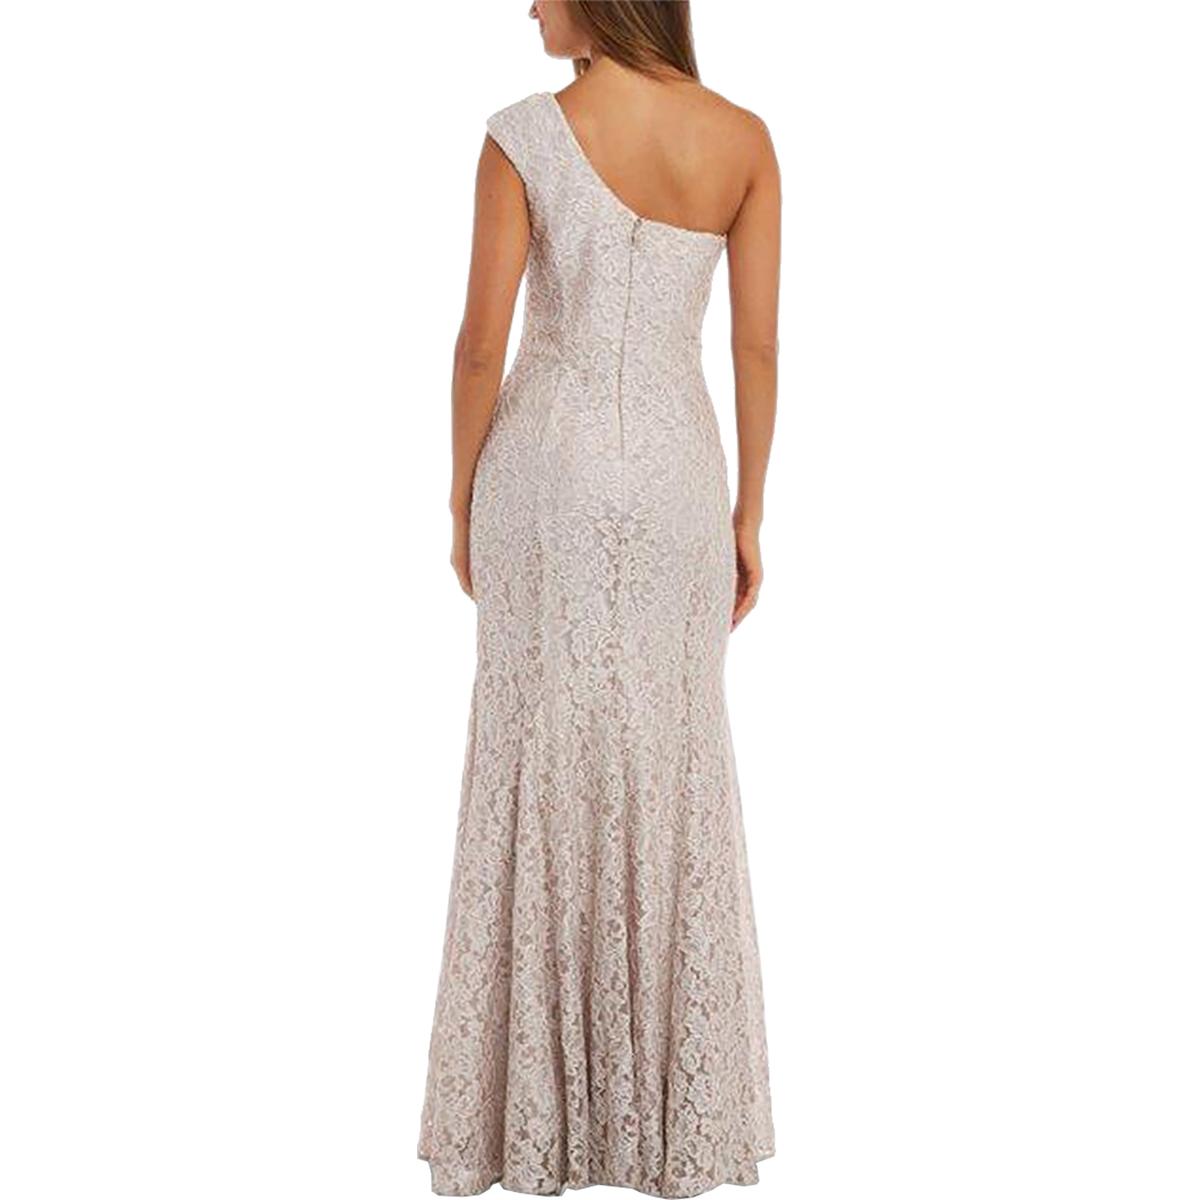 NW Nightway Womens Ivory Floral Glitter Evening Dress Gown Petites 8P